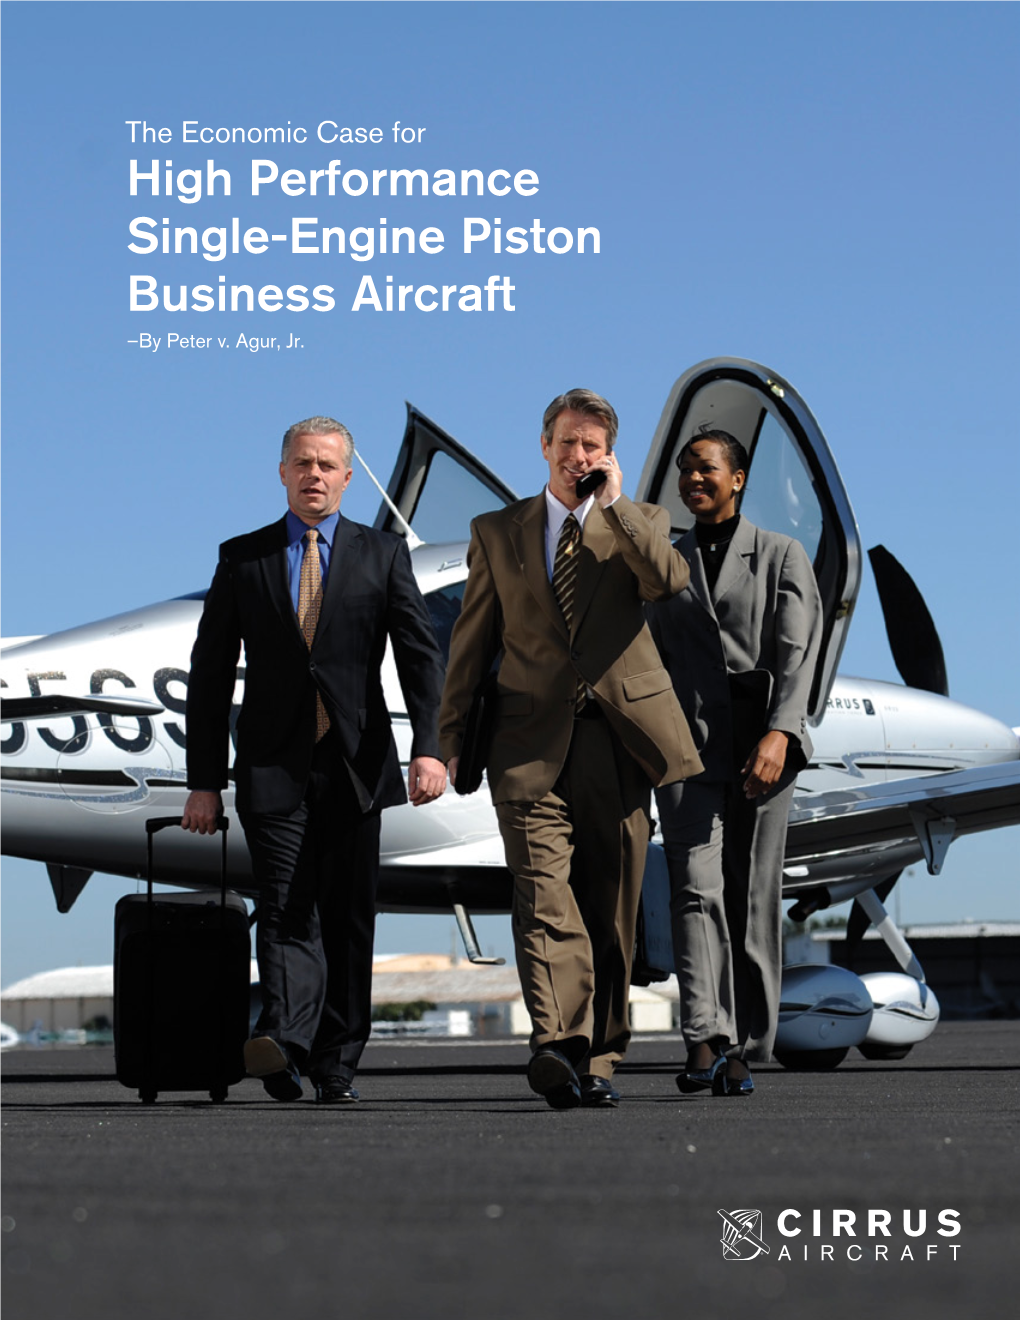 High Performance Single-Engine Piston Business Aircraft –By Peter V